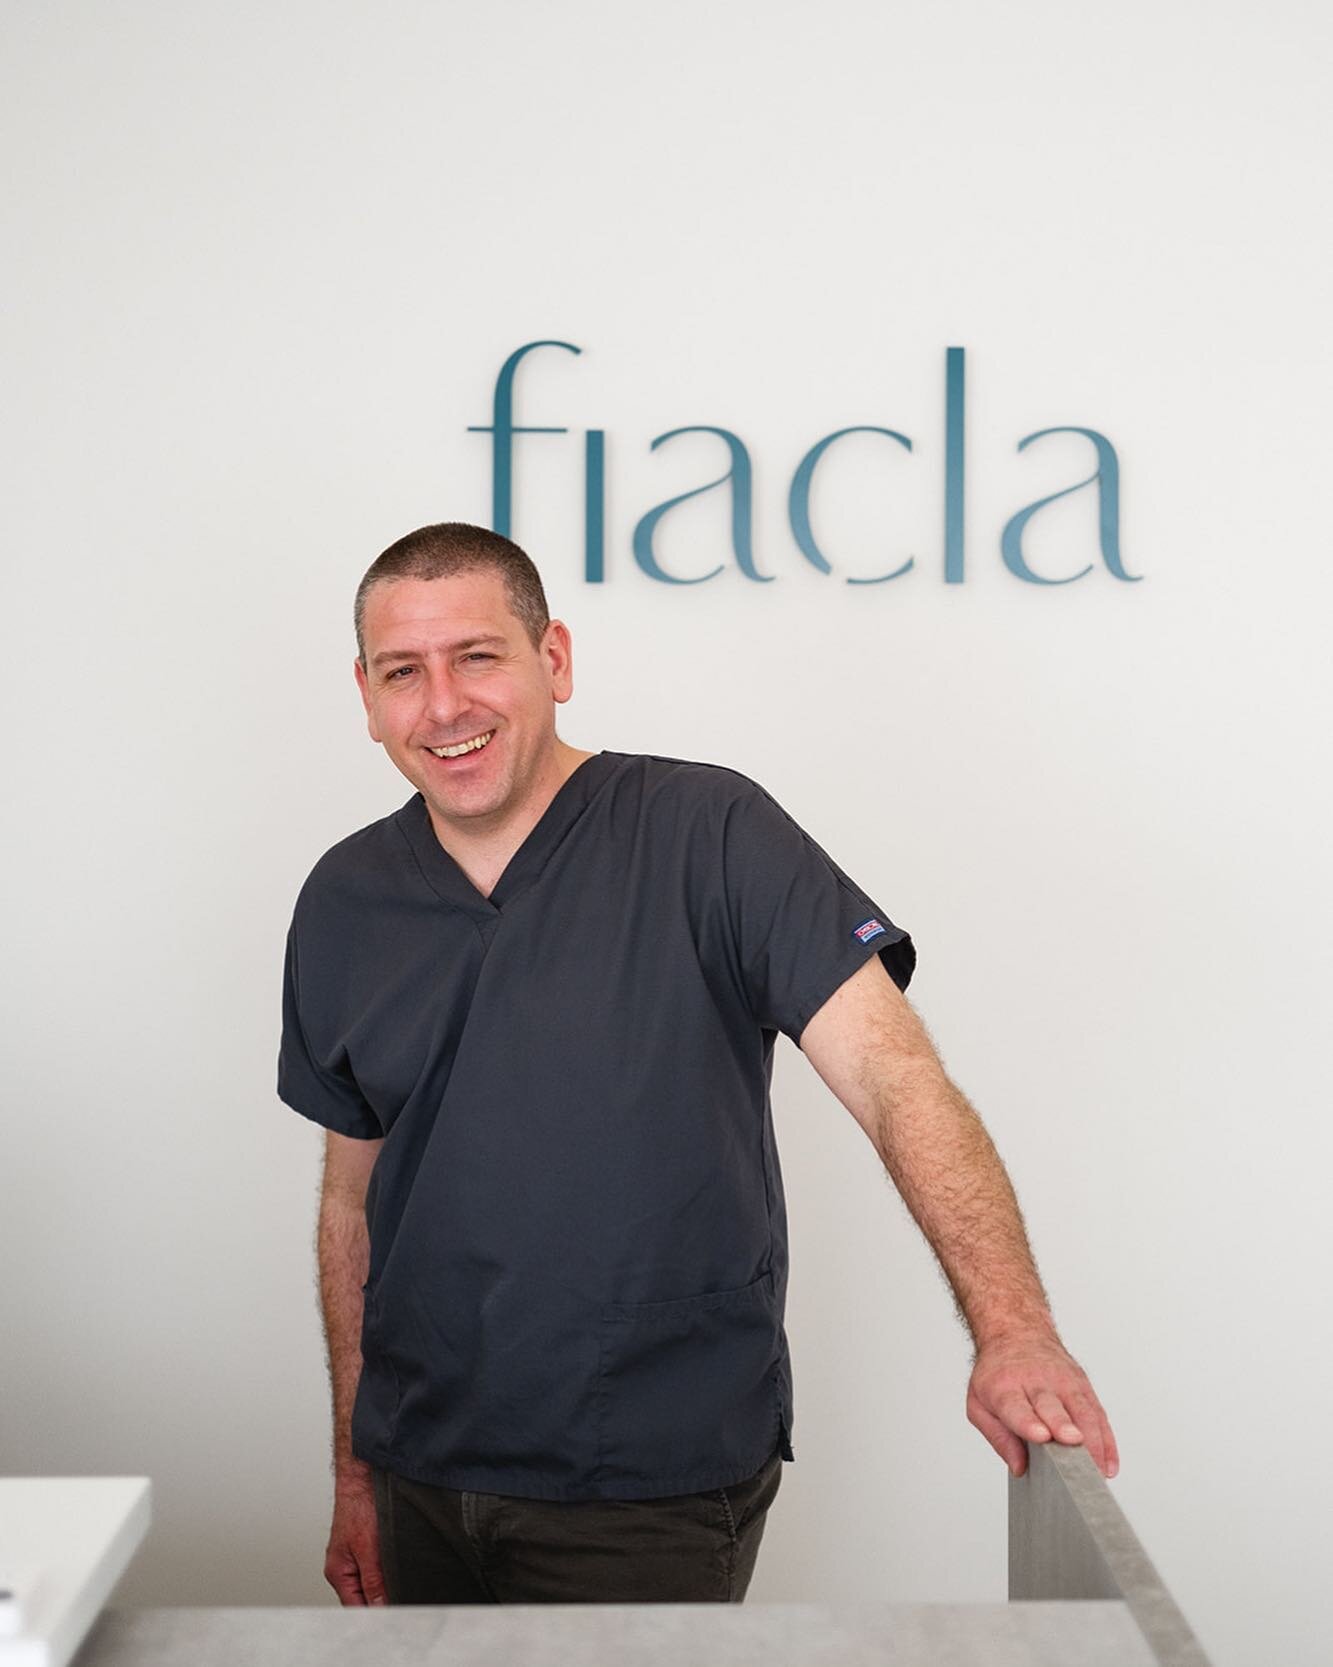 Dr. Shawn Shelley is the founder and principal dentist at Fiacla Dental Clinic. He has worked in private practice for almost ten years, in Singapore and Ireland. Dr Shelley grew up on a ranch in rural Montana, USA, and now lives locally in Dublin wit